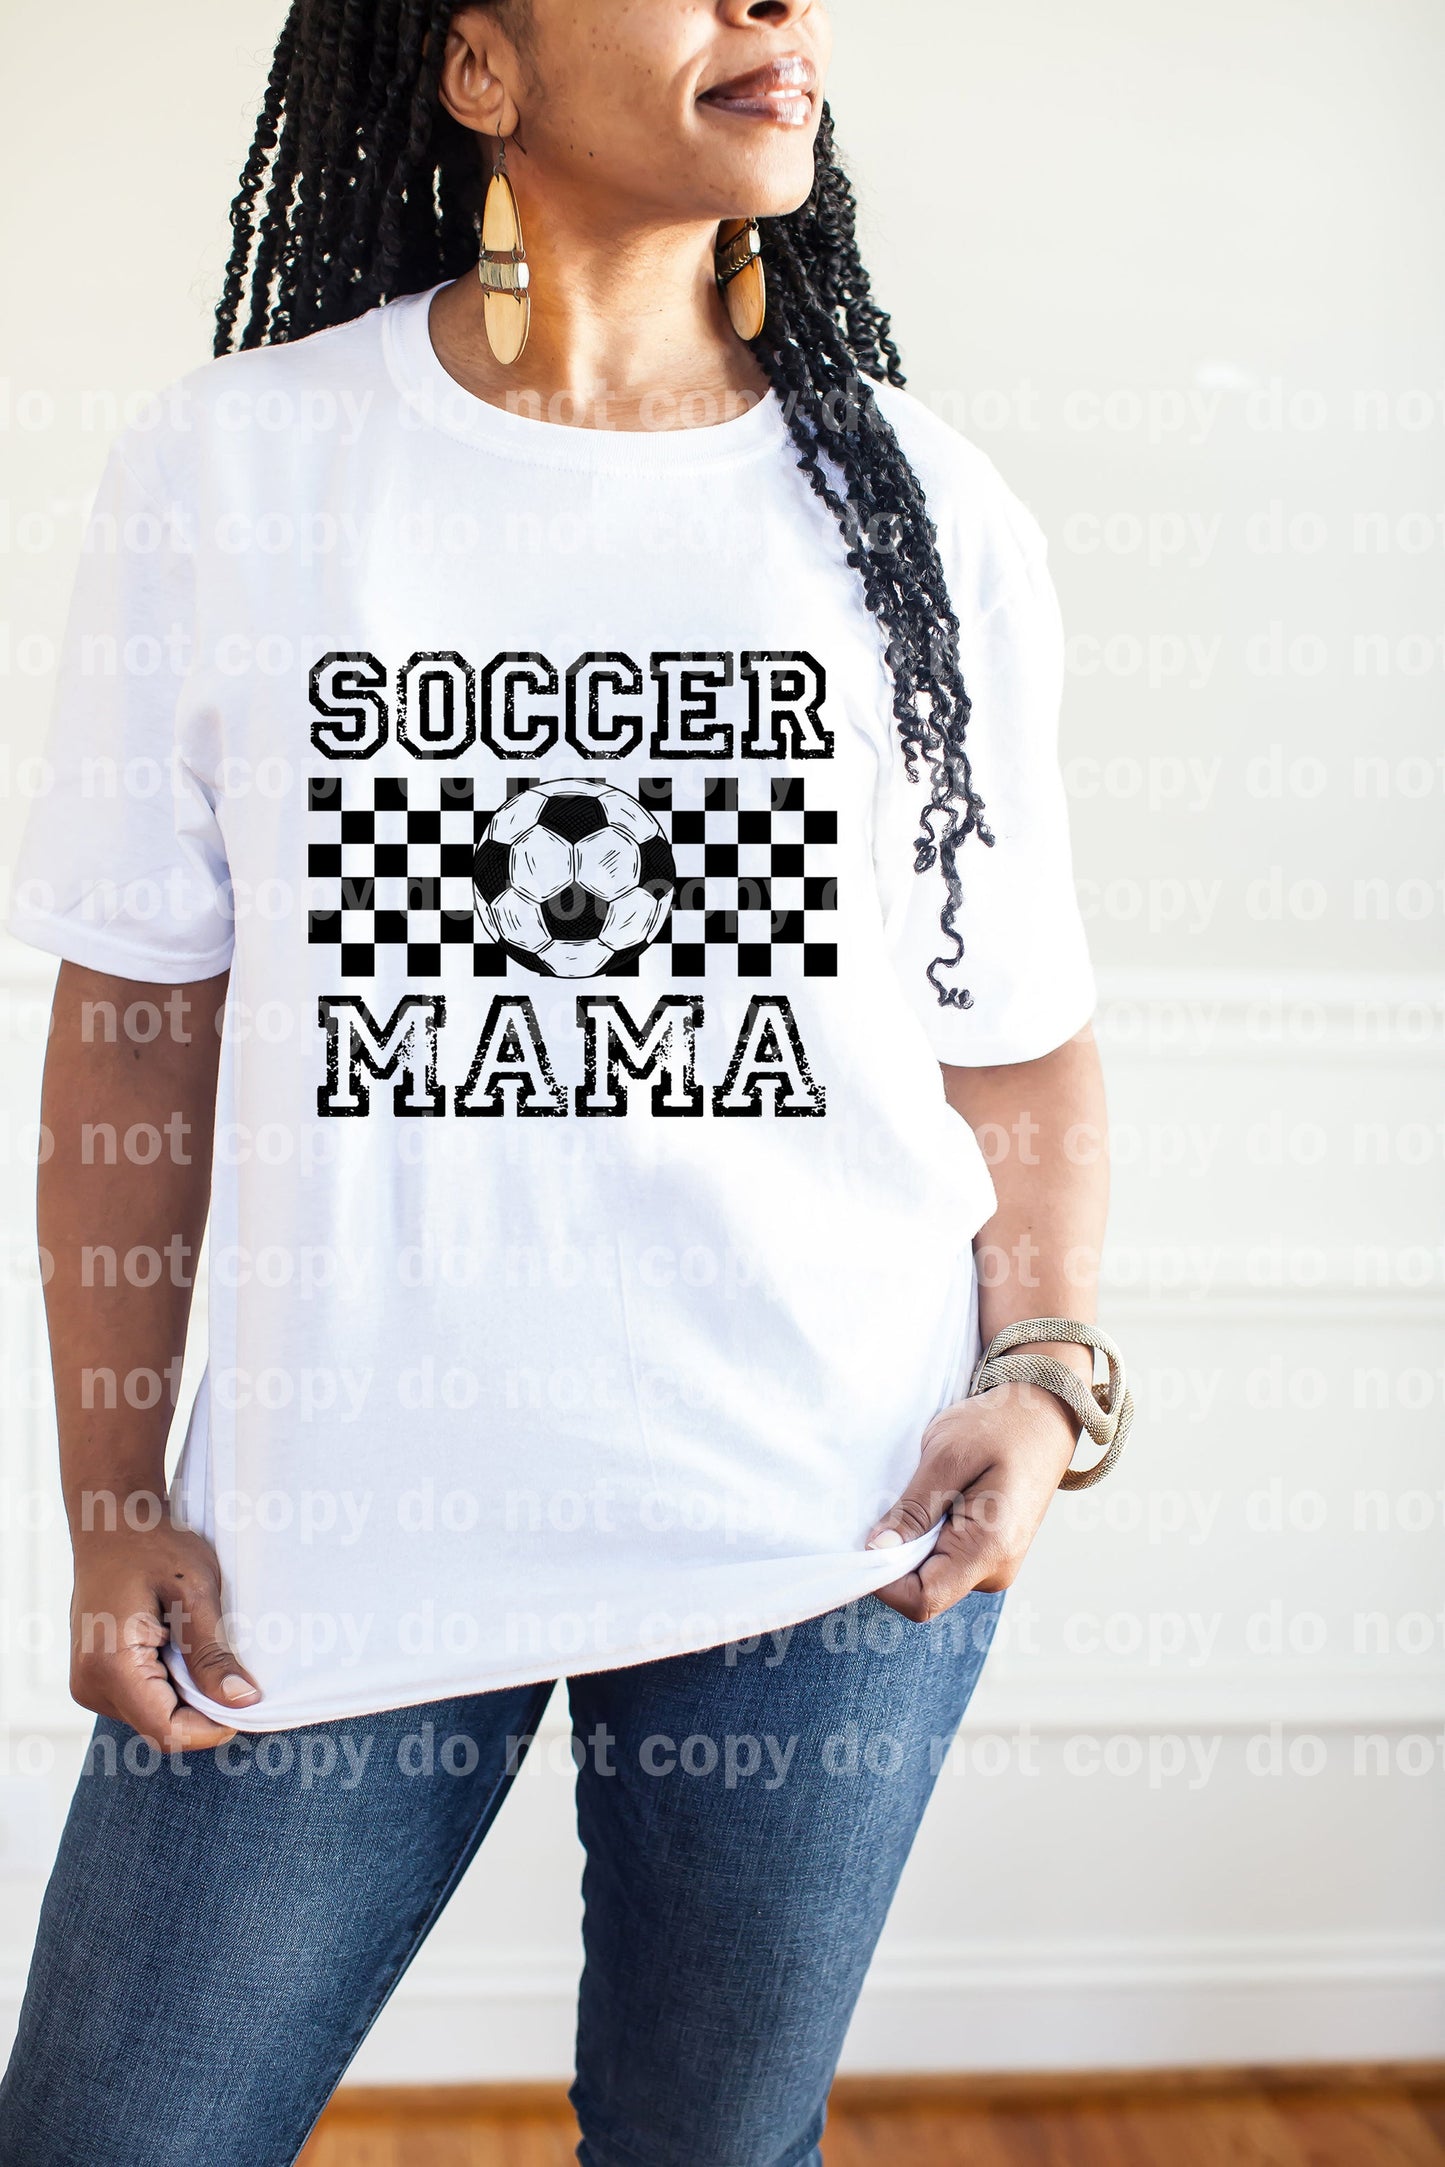 Soccer Mama Full Color/One Color Dream Print or Sublimation Print